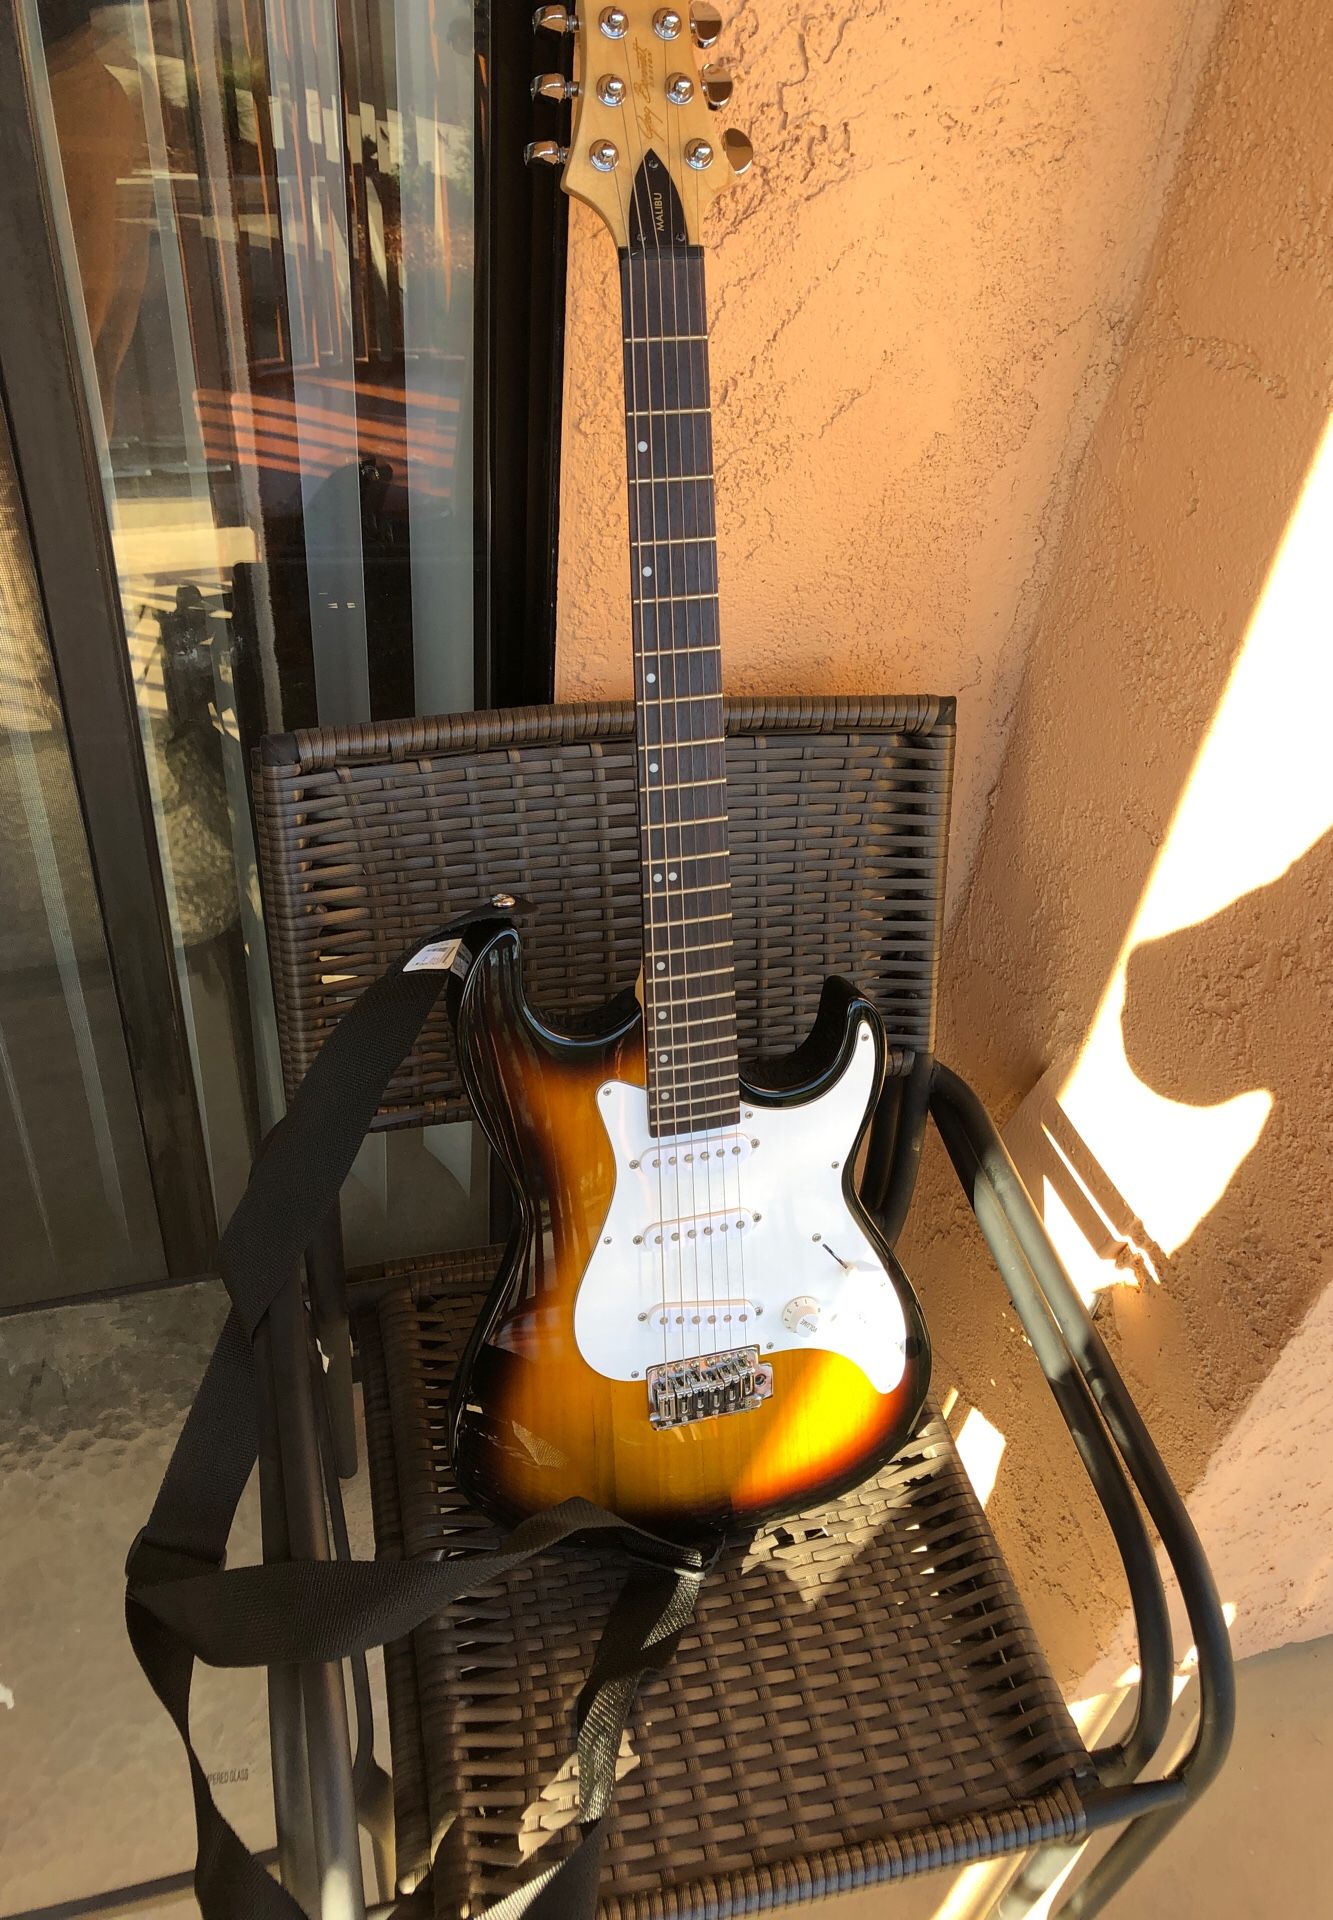 Fender Stratocaster Squier by Signature Series, designed by Greg Bennett